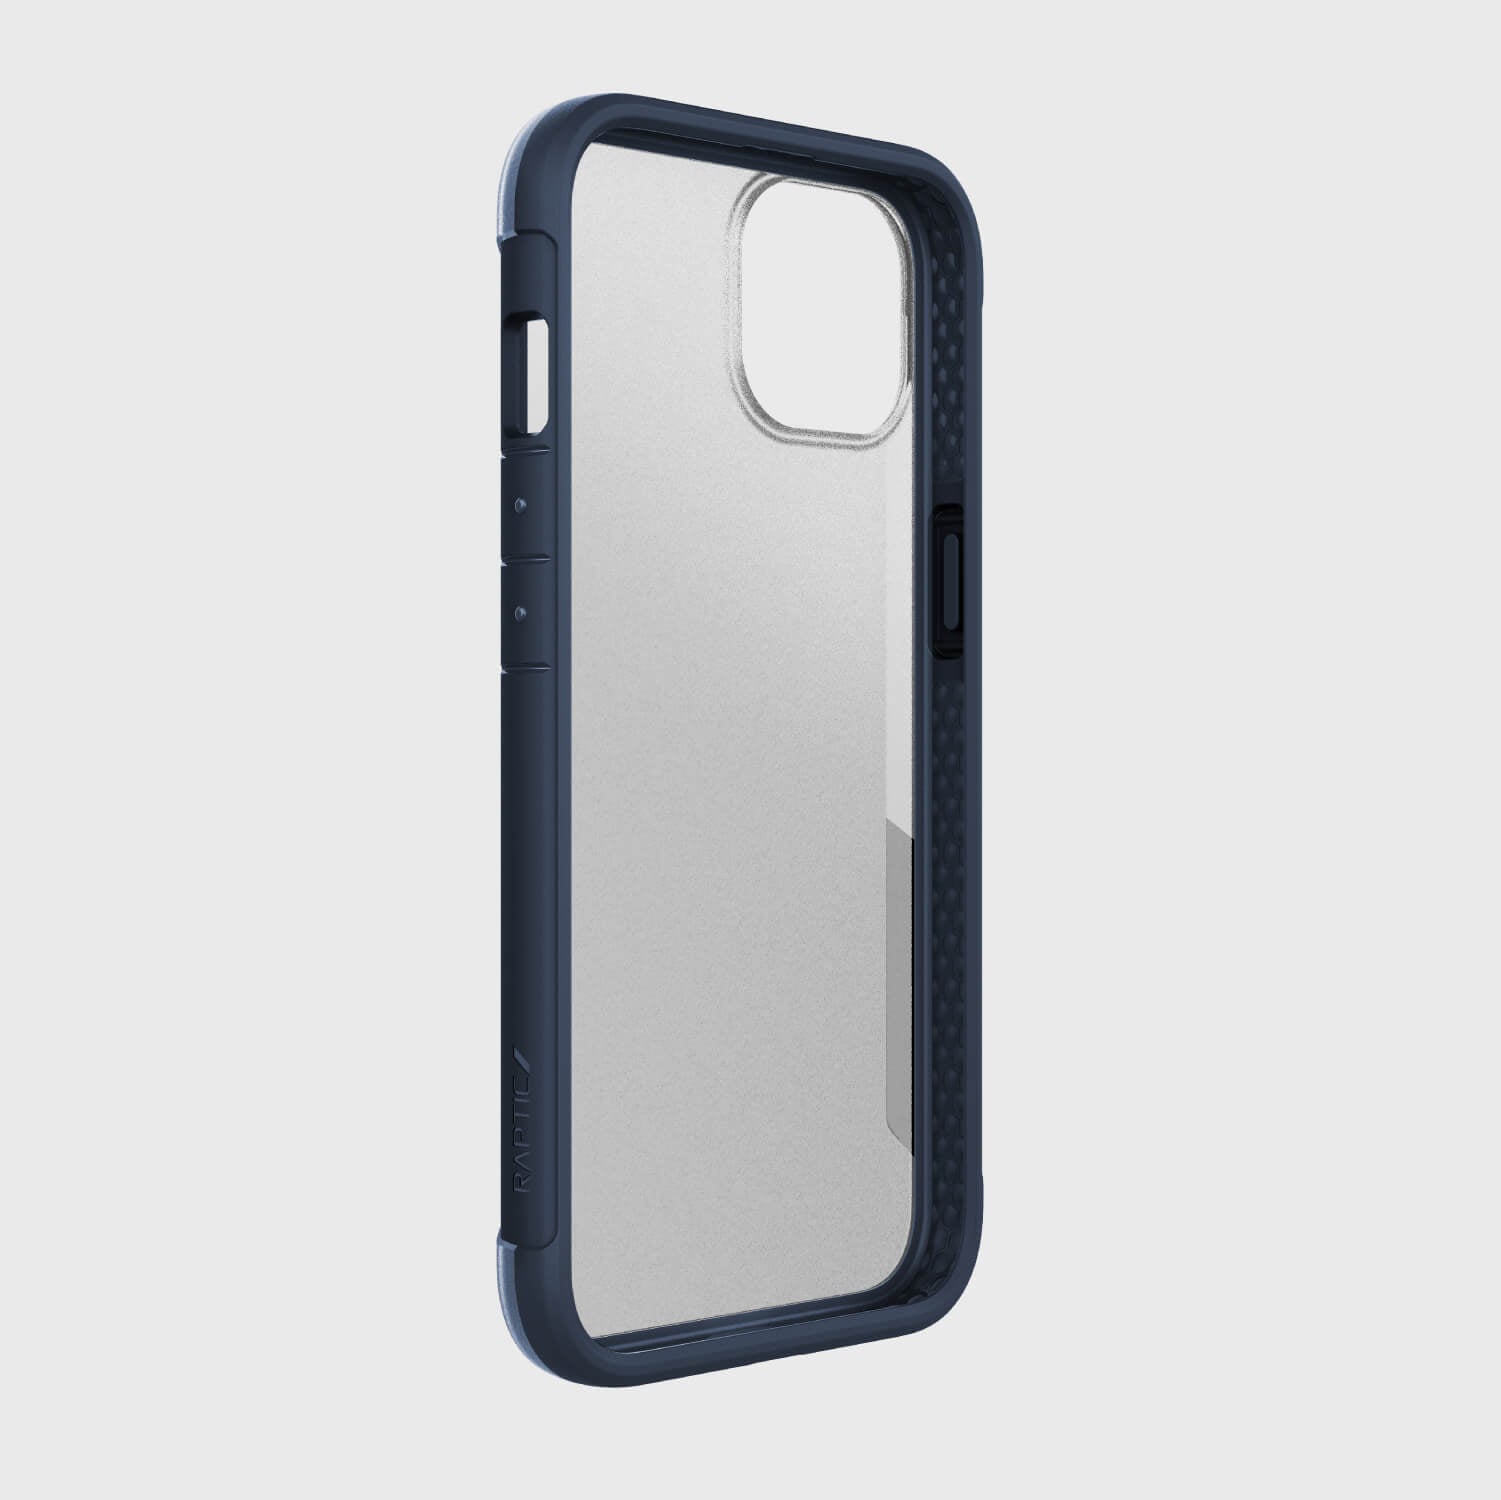 A blue iPhone 13 Case - TERRAIN by Raptic with a clear back that is eco-friendly and biodegradable.